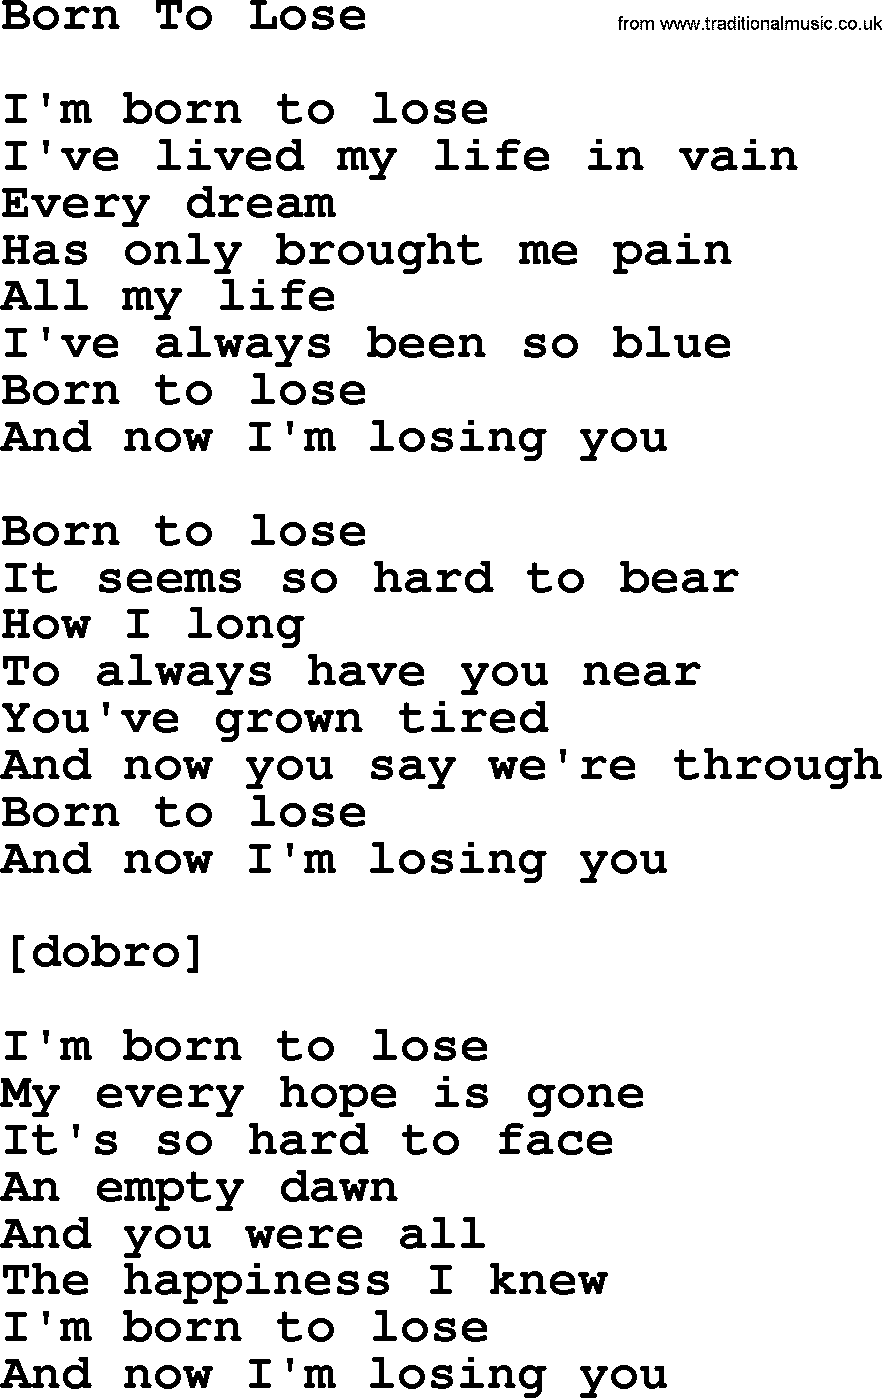 Willie Nelson song: Born To Lose lyrics